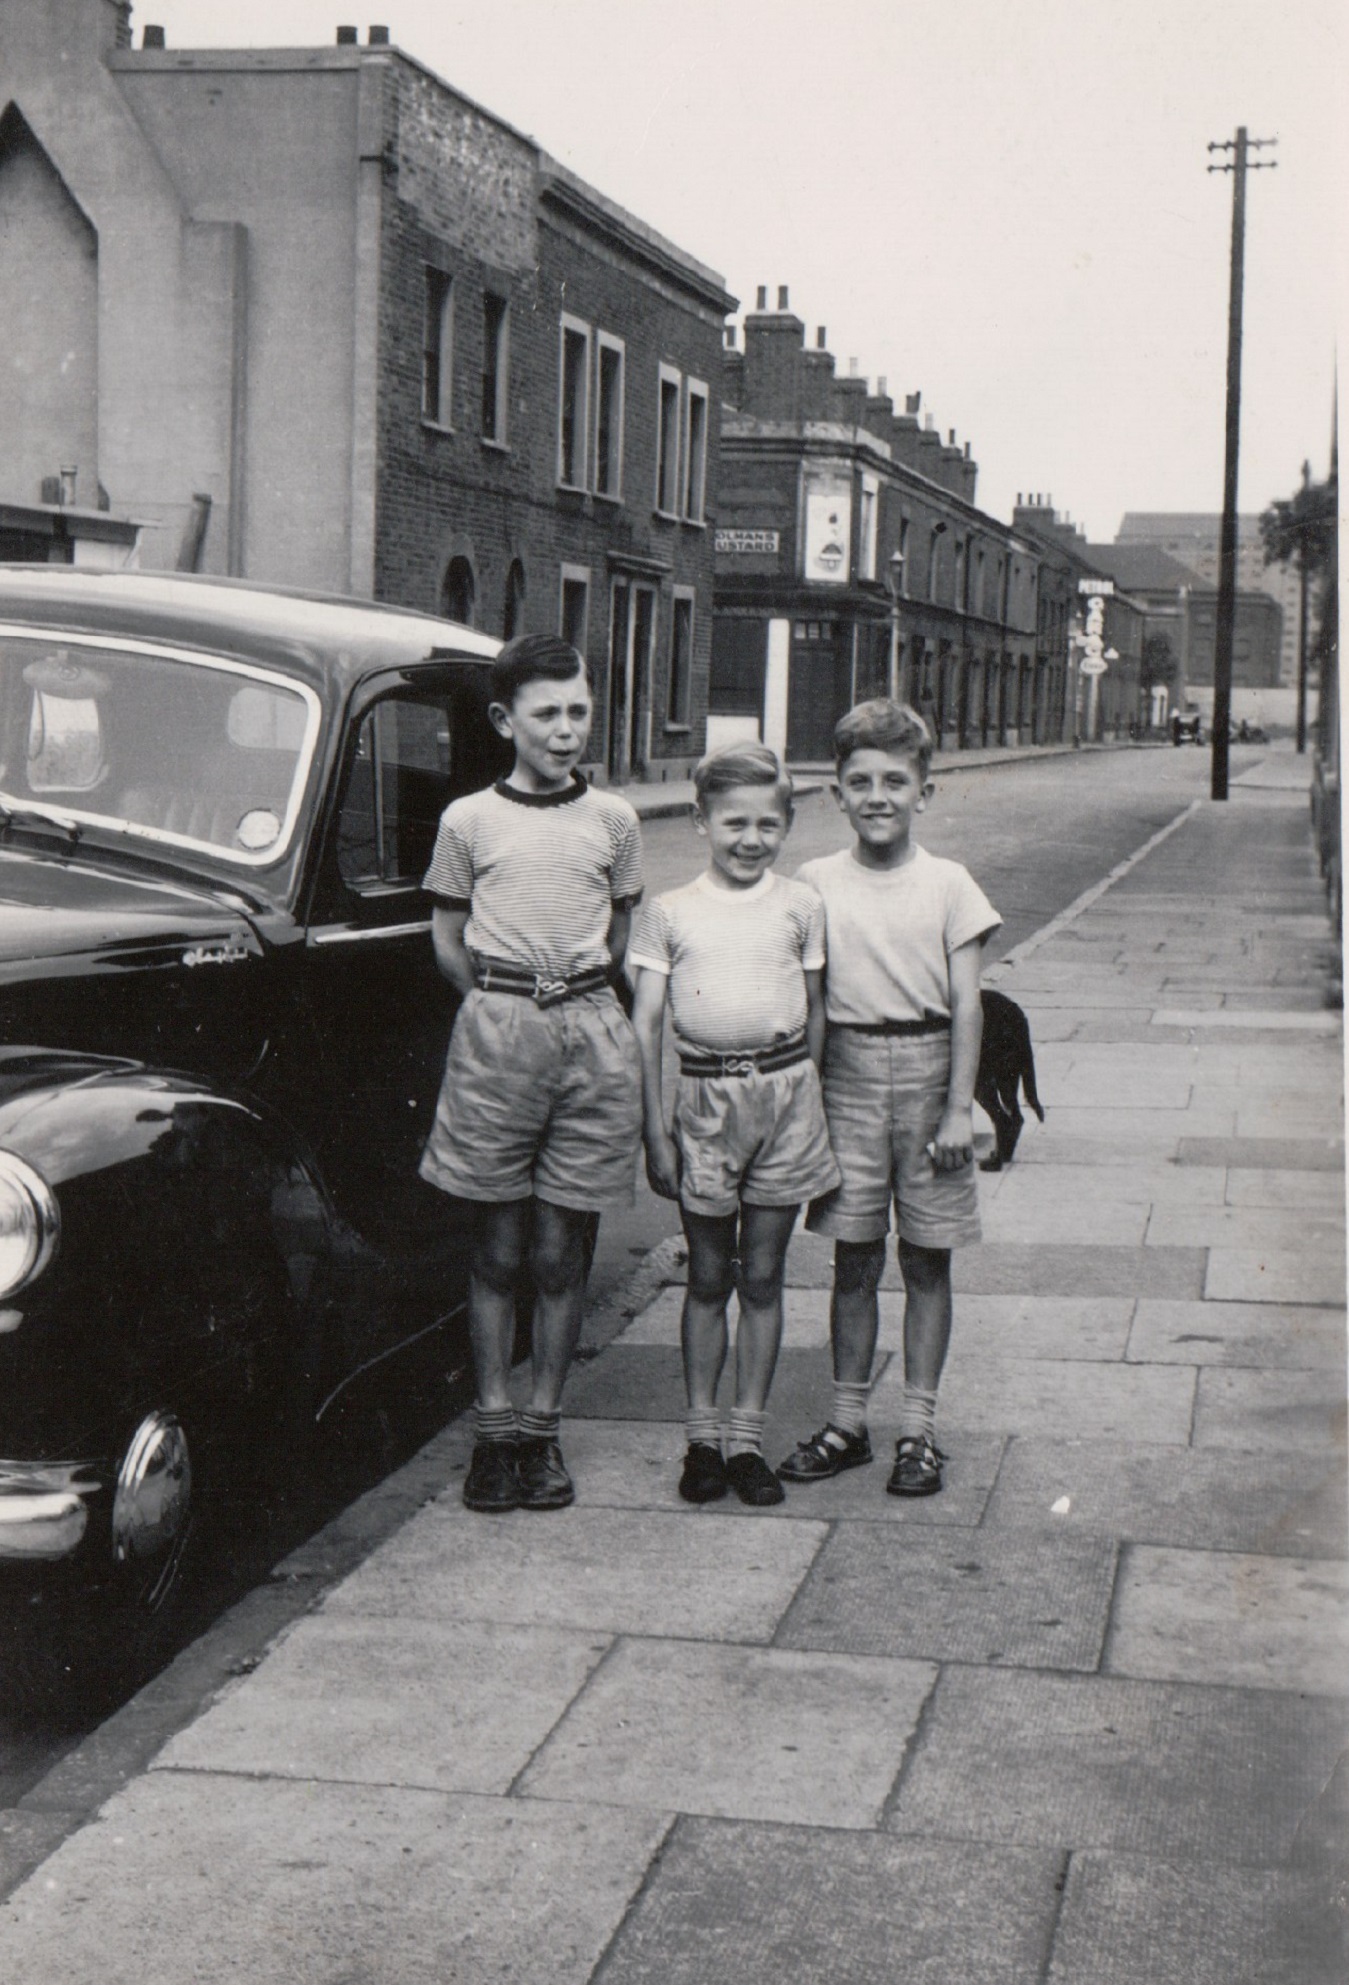 Harry, me and friend John, he lived in the victorian house next to the house with the patched wall....It's 1956 and we are ready for a day out to the hopfields then on to the seaside. Tooke Street, London E14